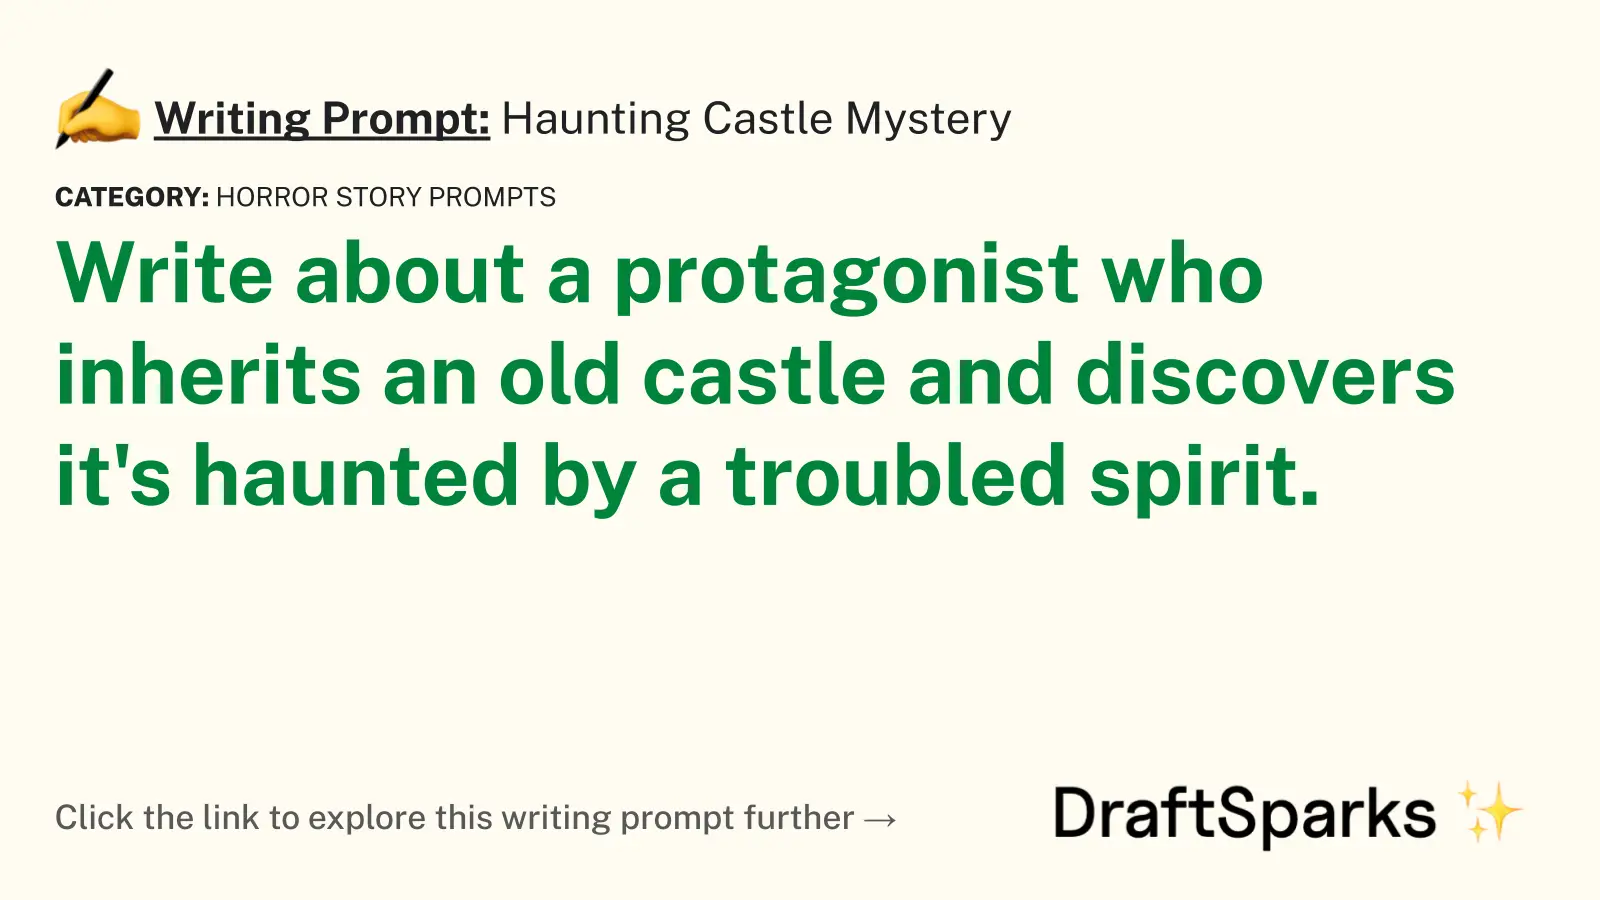 Haunting Castle Mystery